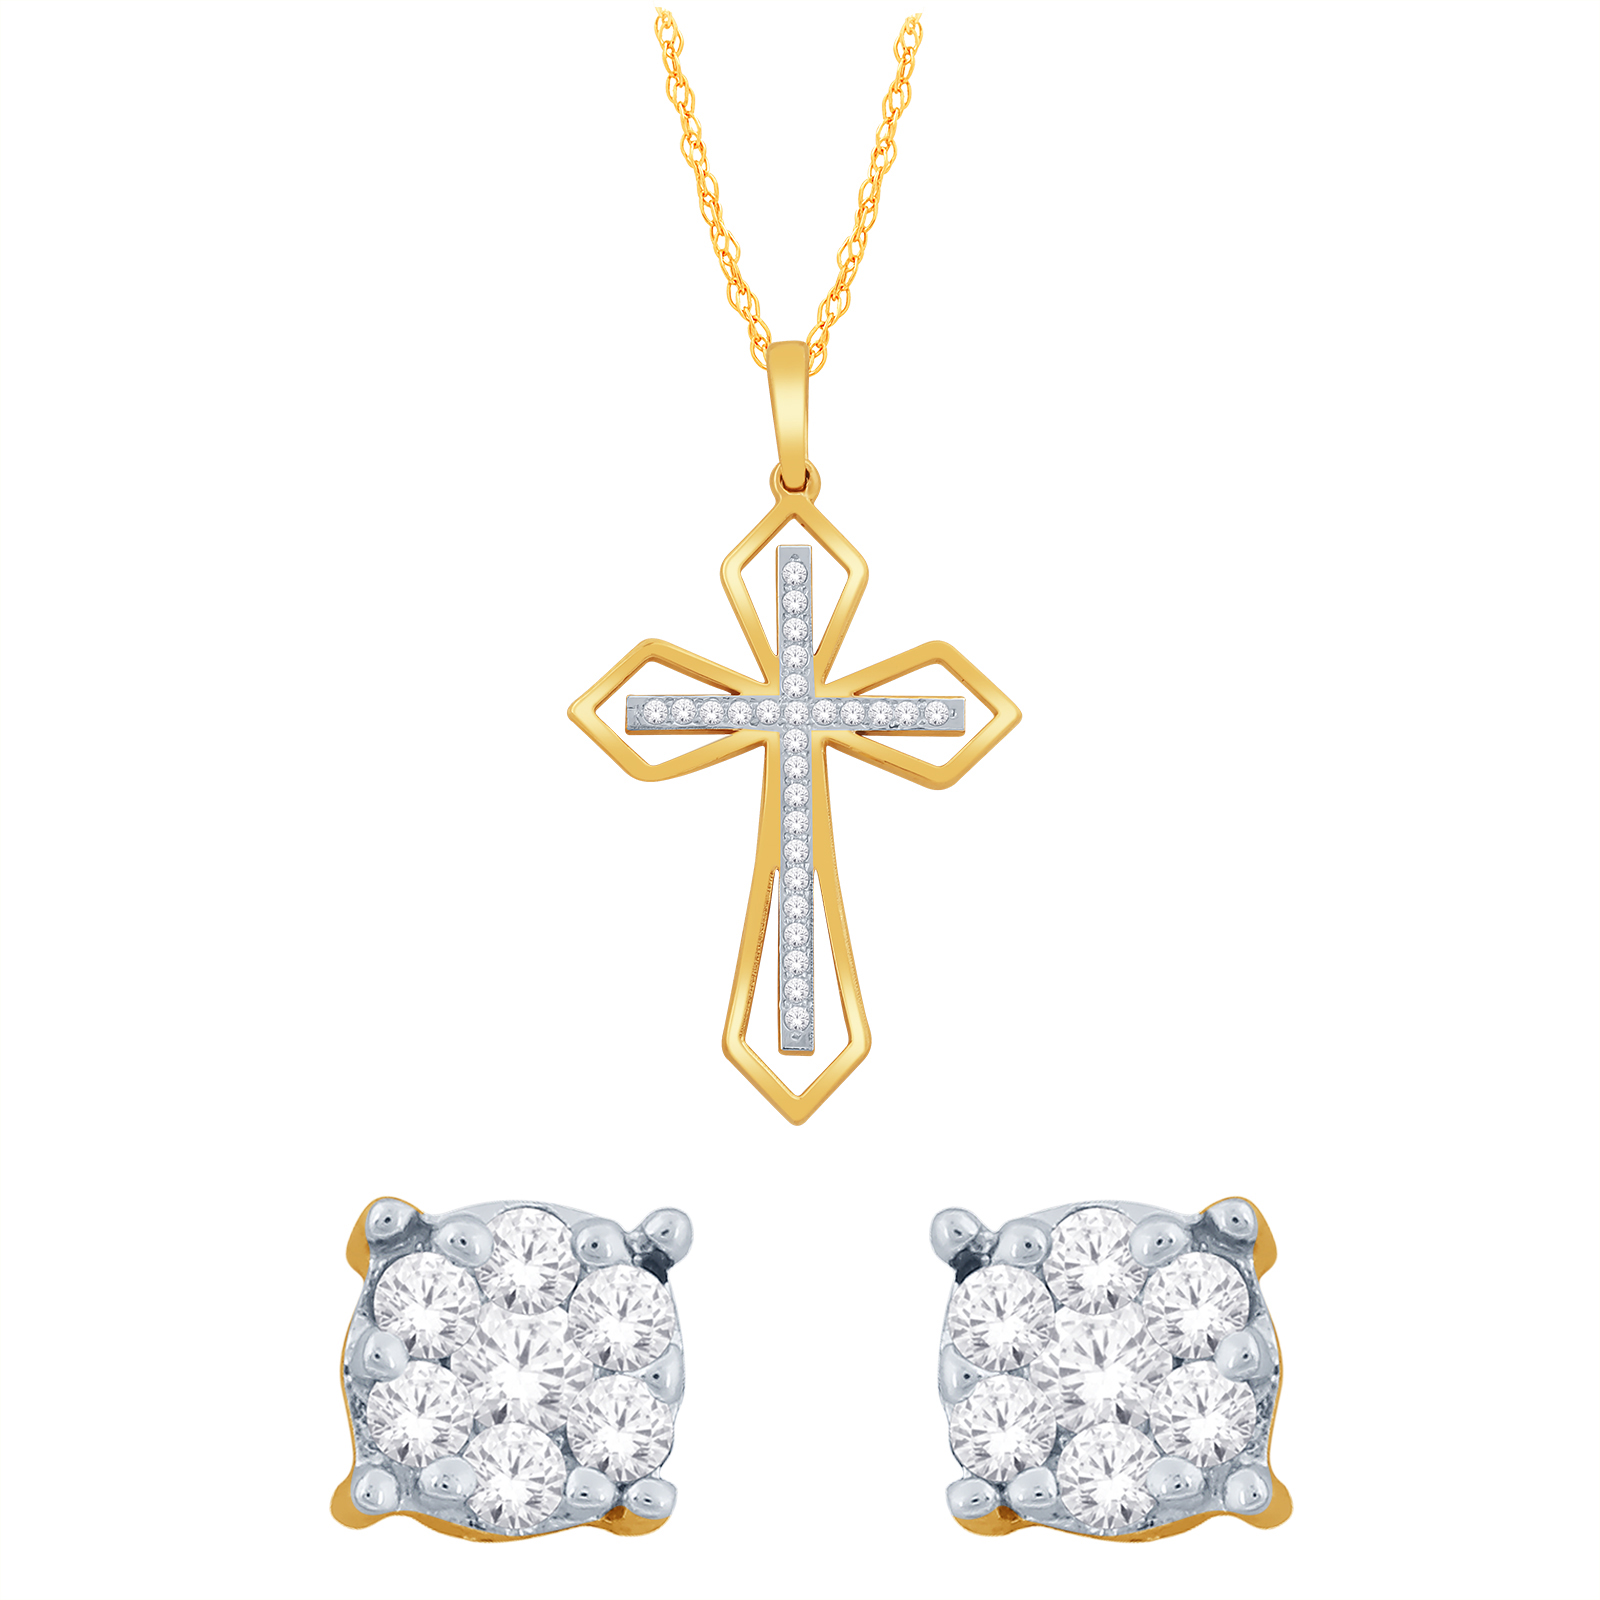 10K Yellow Gold 1/5 cttw Diamond Earring and Crosst Pendant Two Piece Set